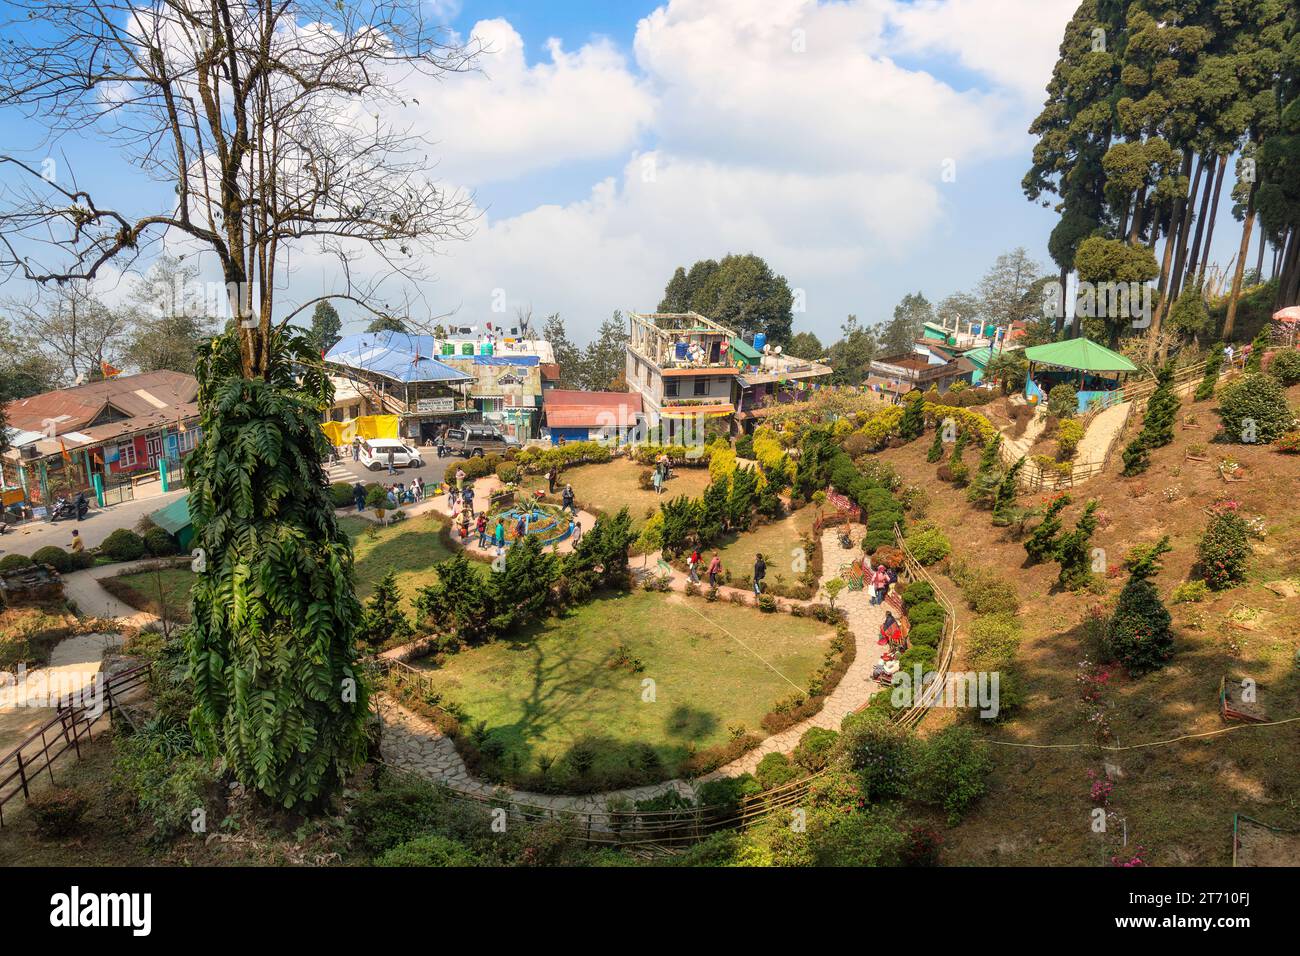 Lamhatta Eco Tourism park located on a mountain slope surrounded with pine trees is a popular tourist destination at Darjeeling, West Bengal, India Stock Photo